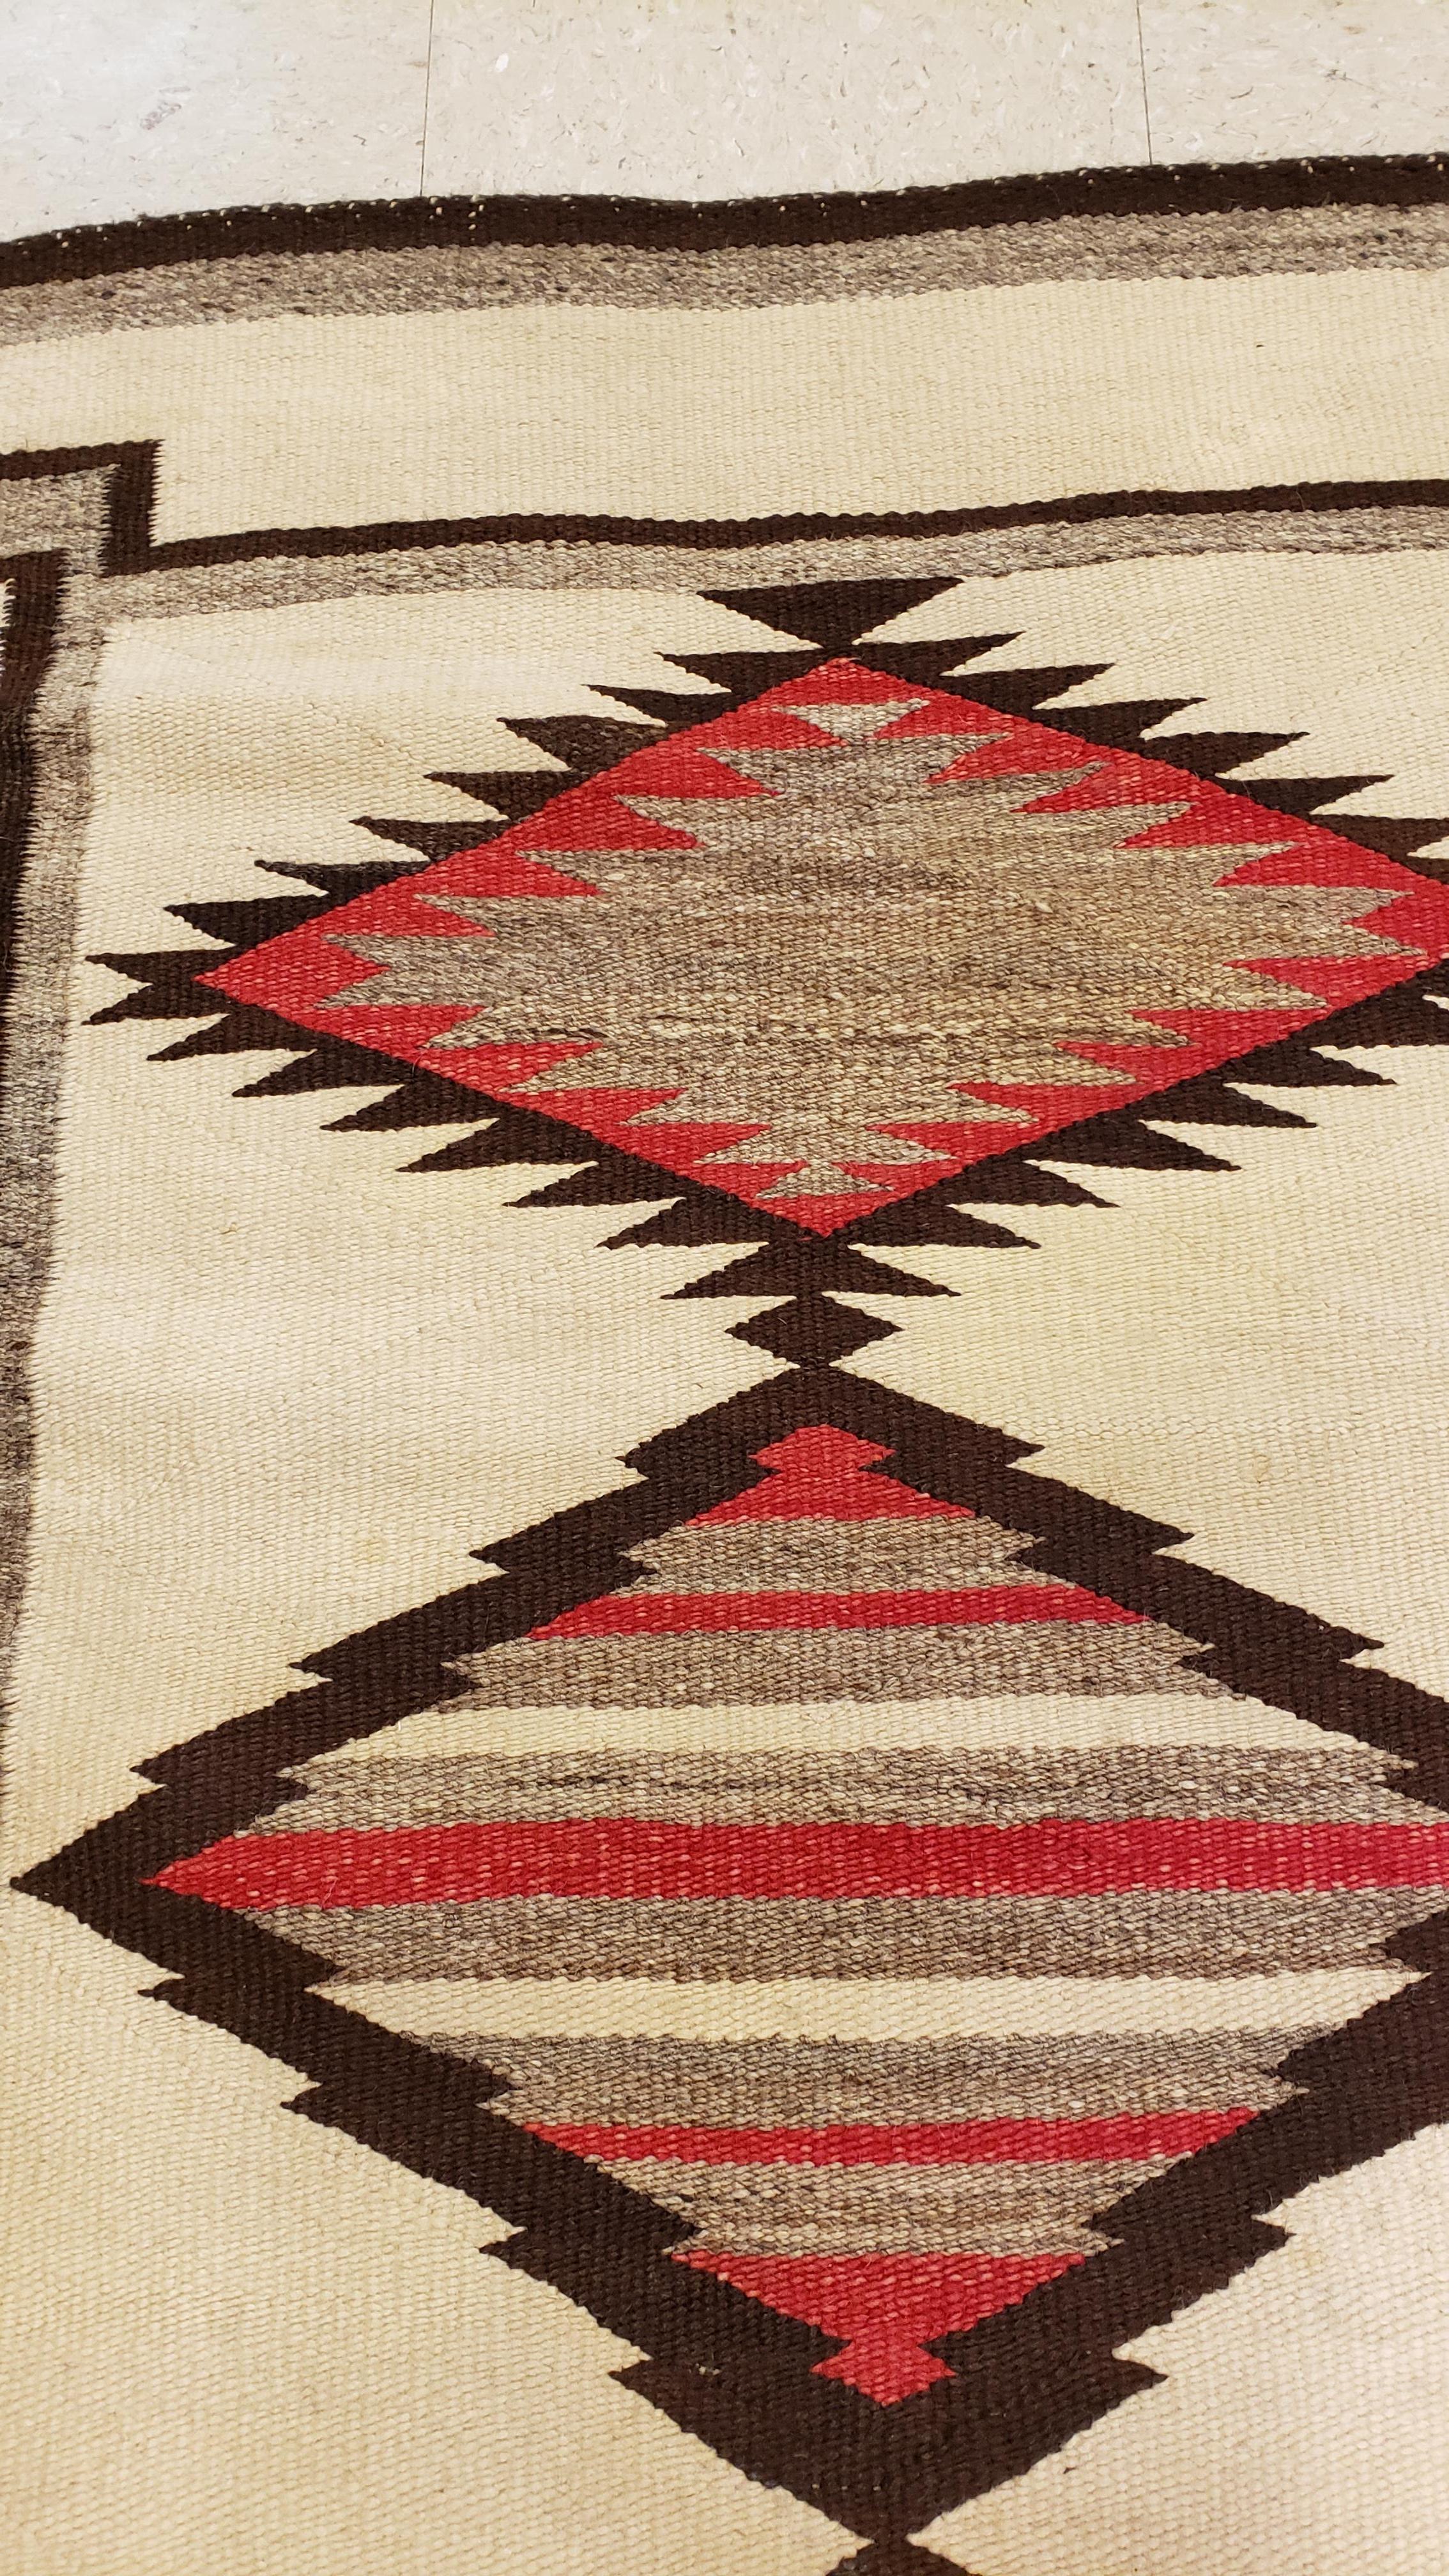 Hand-Knotted Antique Navajo Rug, Handmade Wool Oriental Rug, Red, Beige and Brown